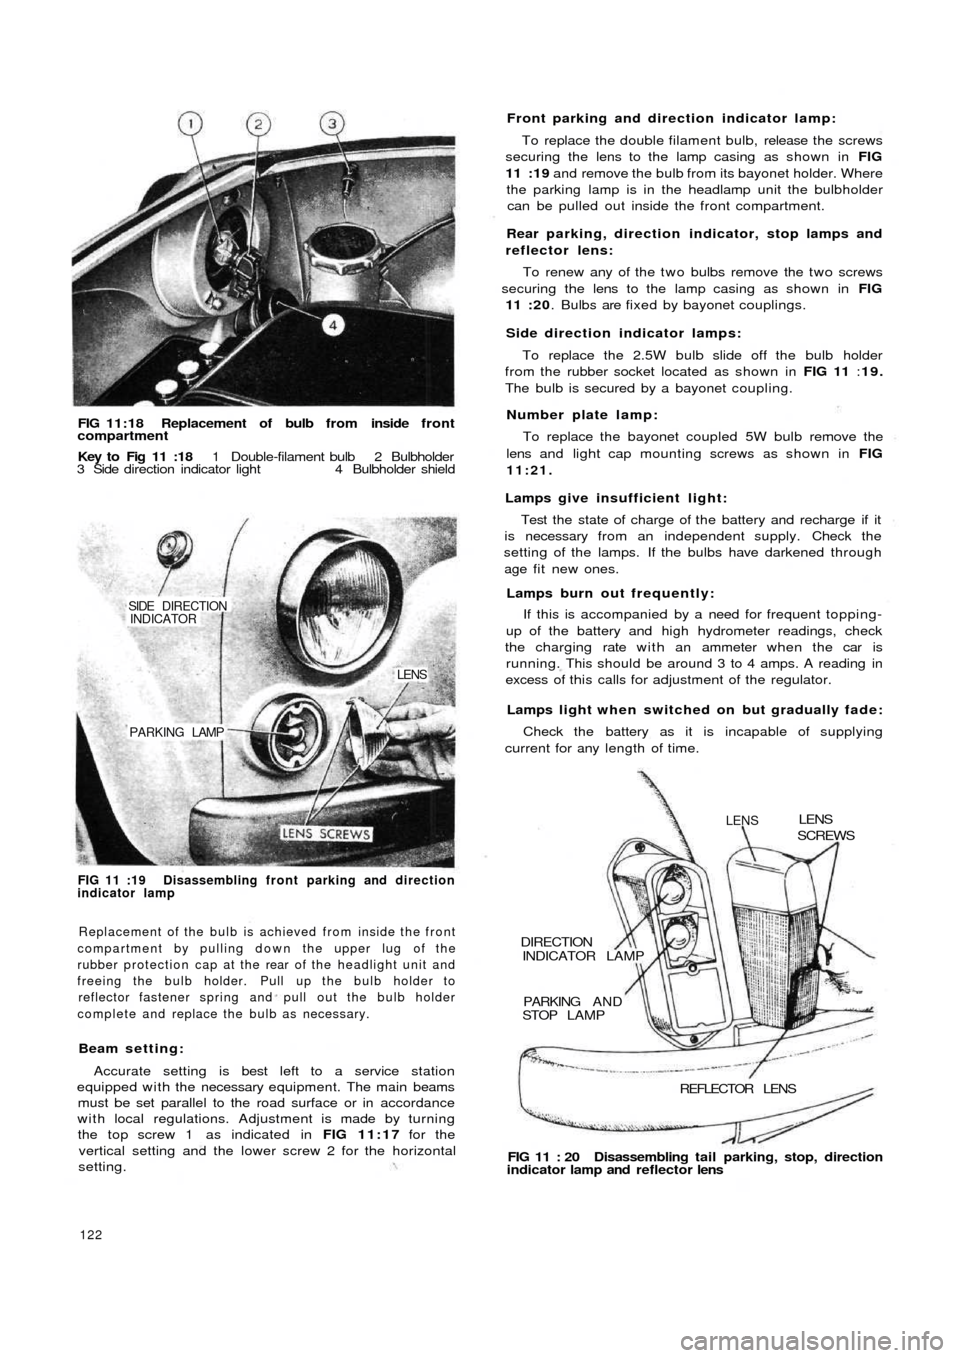 FIAT 500 1972 1.G Workshop Manual FIG 11:18 Replacement of bulb from inside f r o n tcompartment
Key to  Fig 11 :18 1 Double-filament bulb 2 Bulbholder
3 Side direction indicator light 4 Bulbholder shield
PARKING LAMP
LENS
SIDE  DIREC